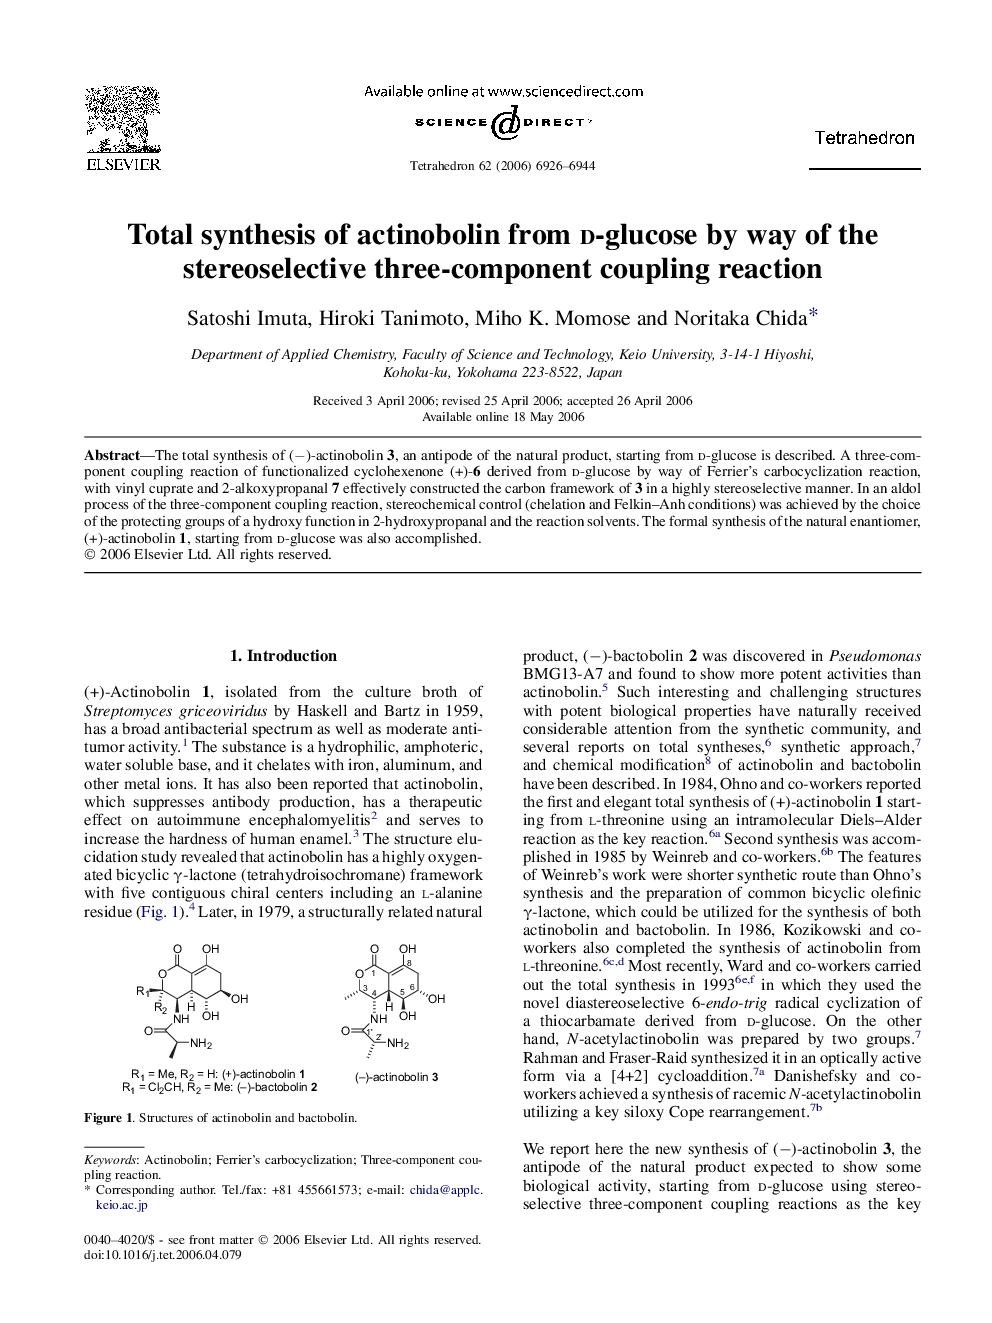 Total synthesis of actinobolin from d-glucose by way of the stereoselective three-component coupling reaction